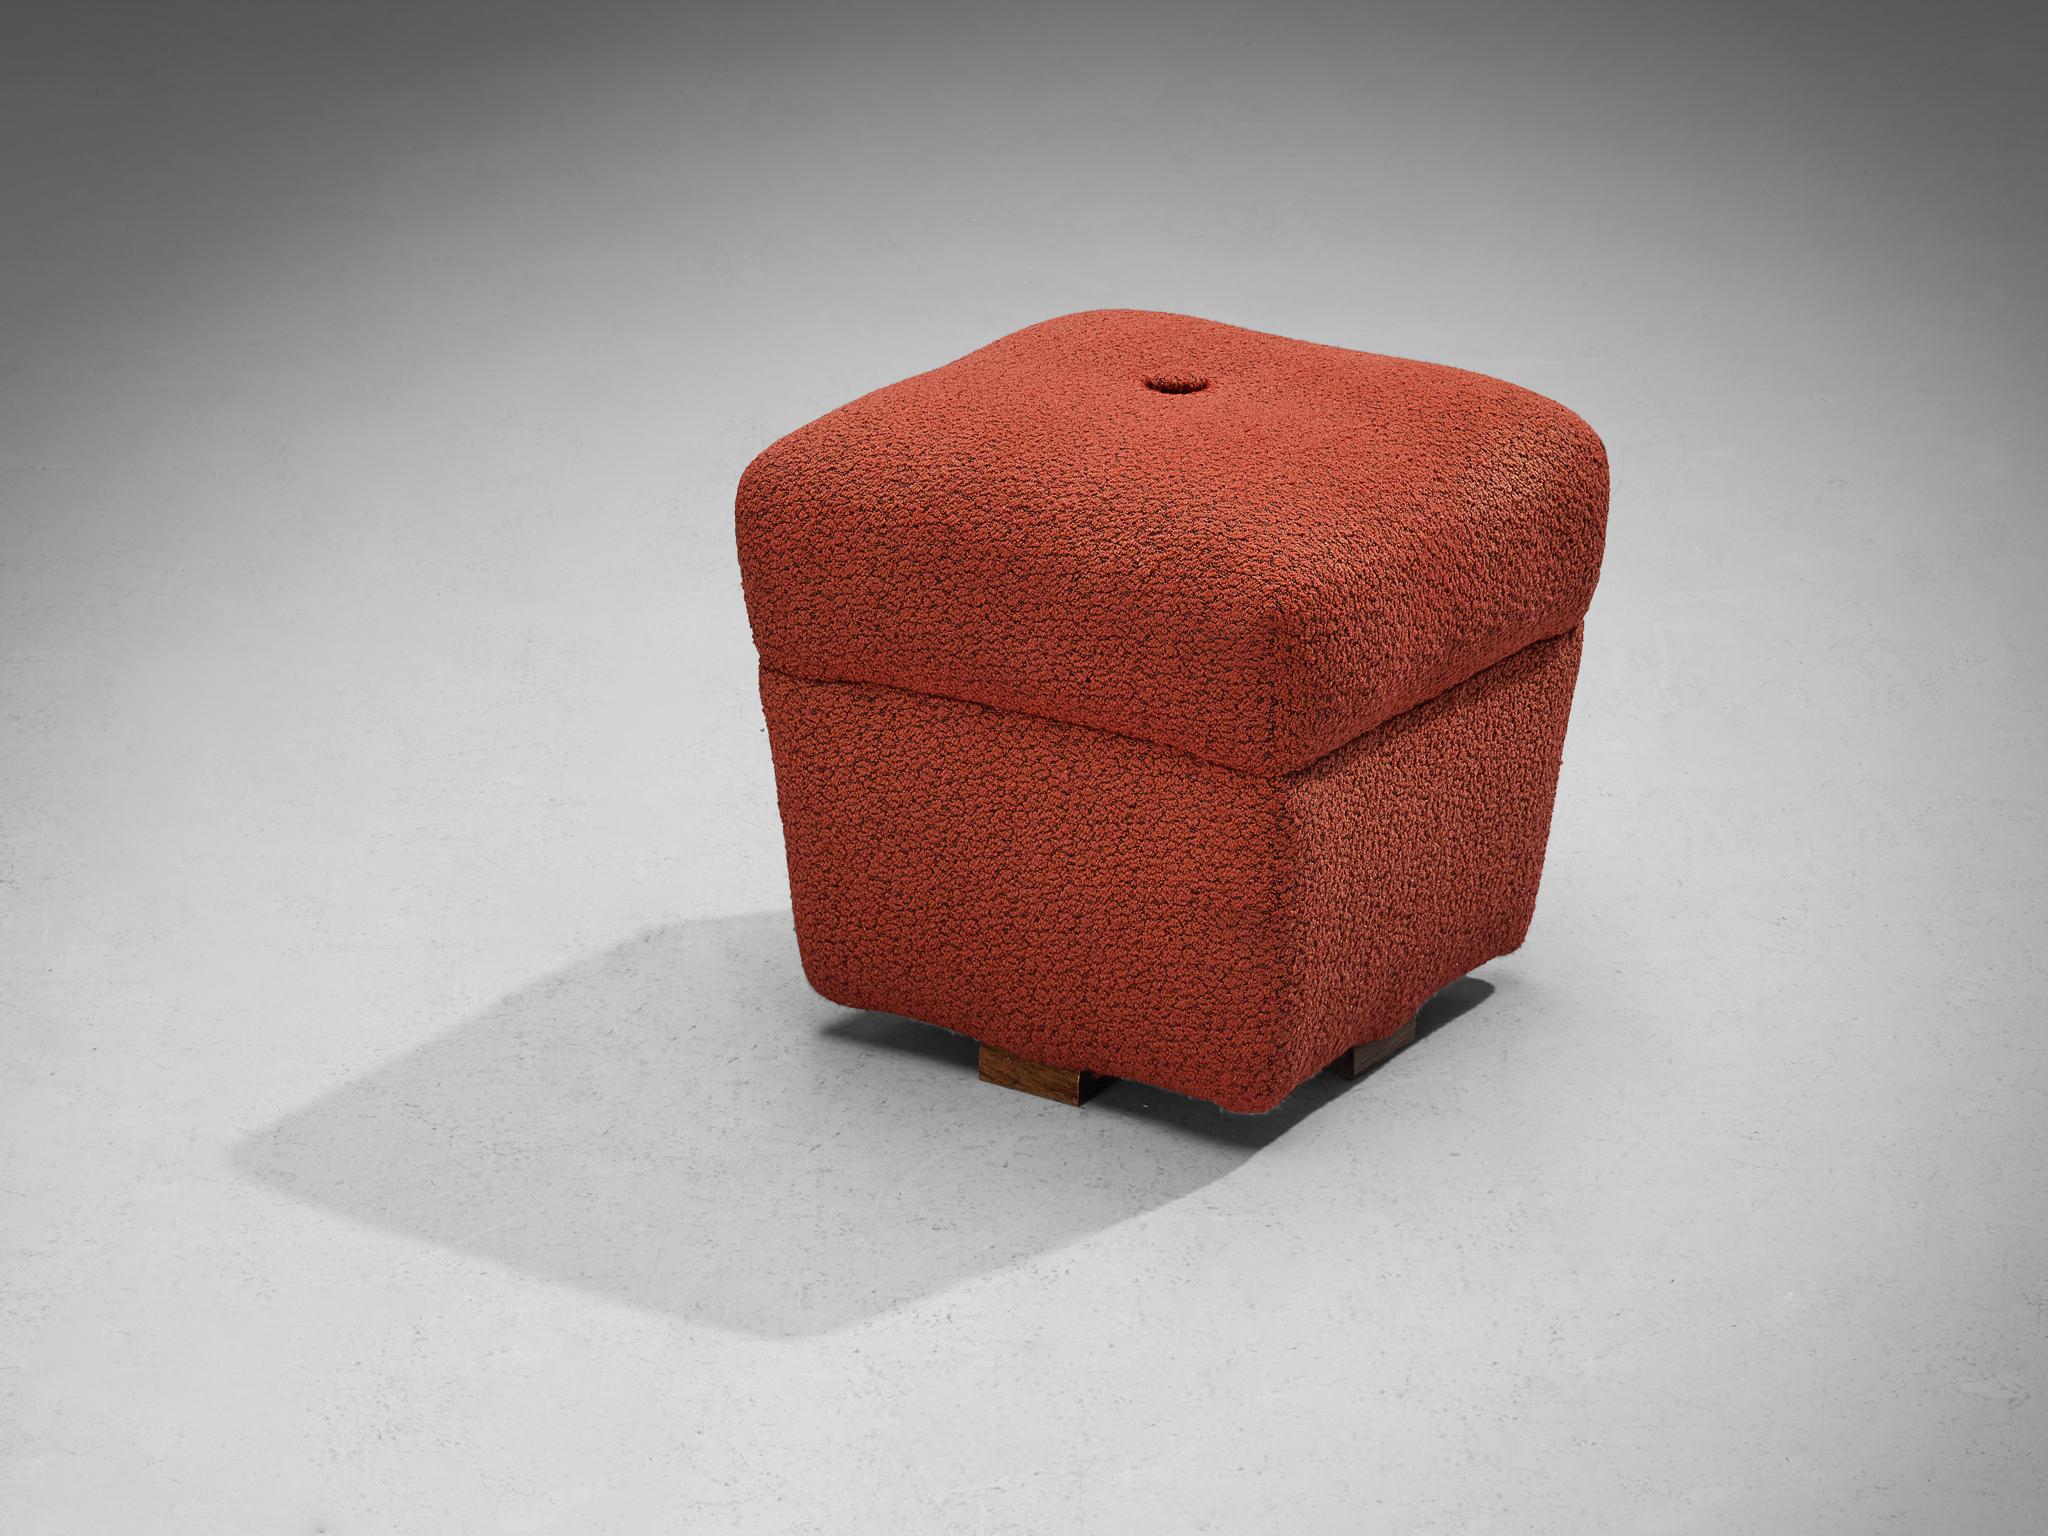 Jindrich Halabala for UP Závody, footstool / tabouret / ottoman, fabric, stained oak, Czech Republic, 1930s.

This poetic pouf is designed in the 1930s when the Art Deco Period was at its highest point and distinguishes itself by means of artistic